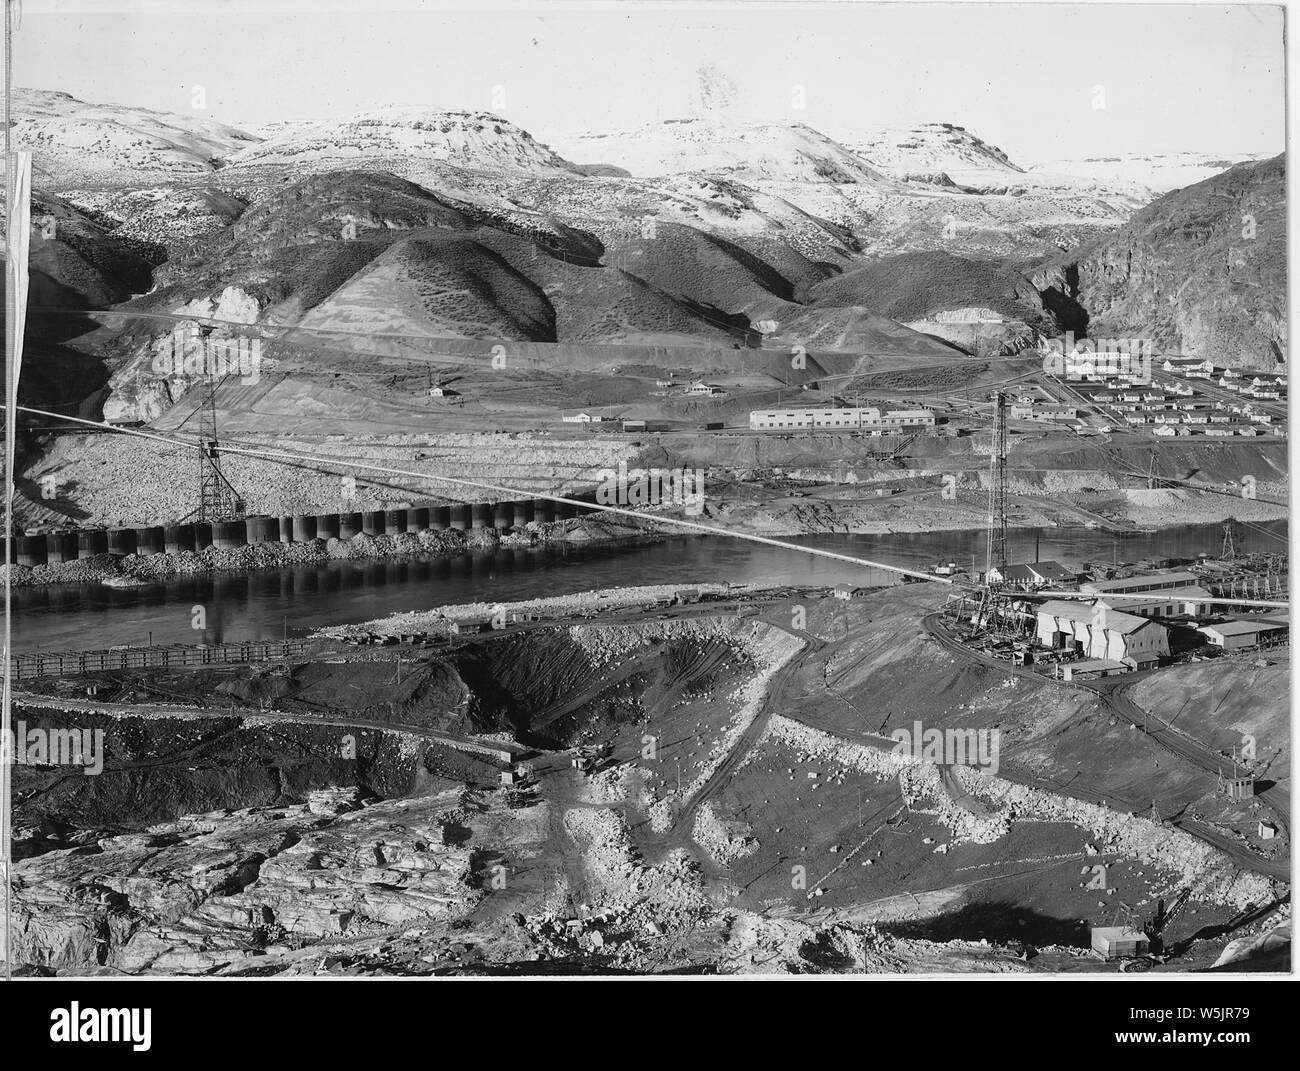 A three-view panorama of the development from top of east abutment.; Scope and content:  Photograph from Volume Two of a series of photo albums documenting the construction of the Grand Coulee Dam and related work on the Columbia Basin Project. General notes:  This image is part of a panoramic view which includes items 933, 934, and 935. The original image measures approximately 27 inches in width. Stock Photo